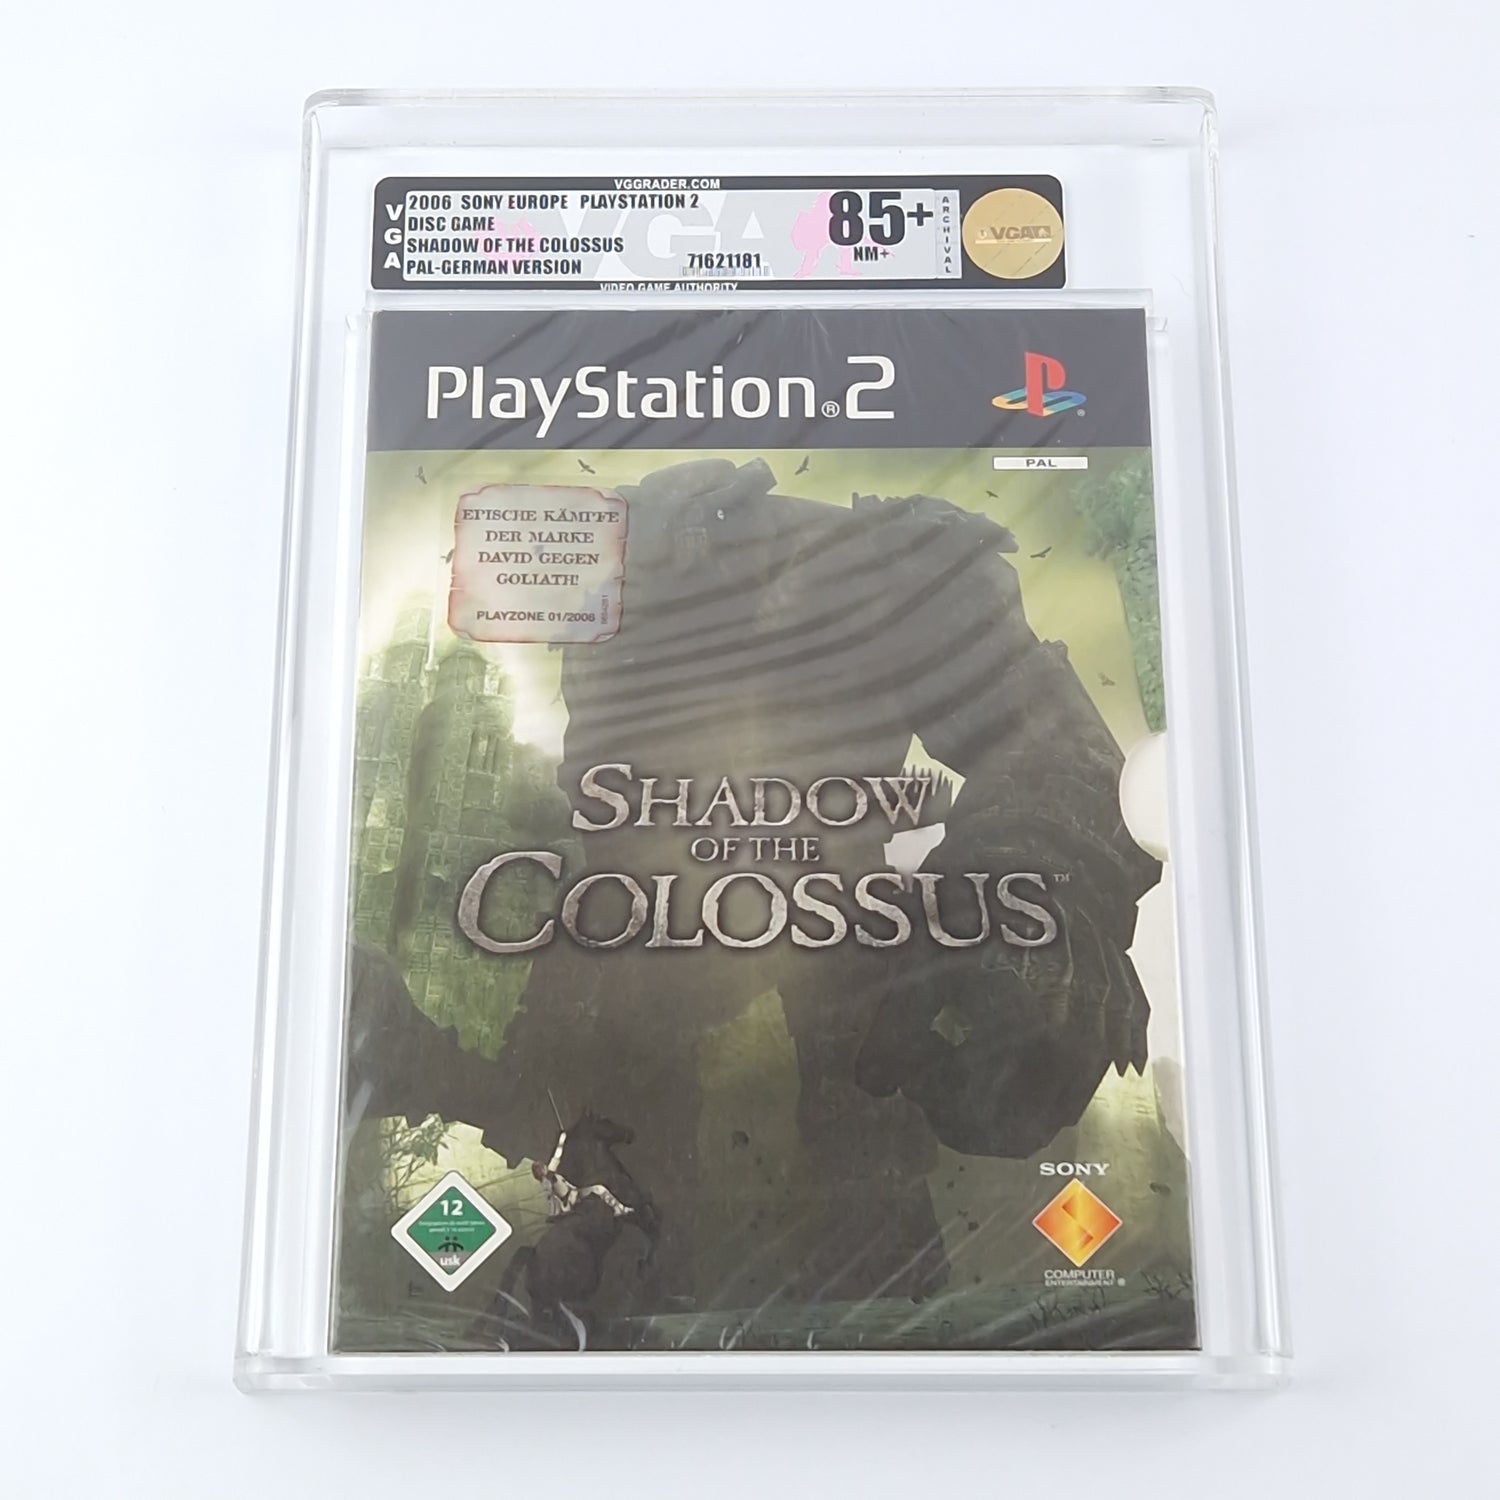 Sony Playstation 2 : Shadow of the Colossus - OVP SEALED PS2 PAL NEW | VGA 85+